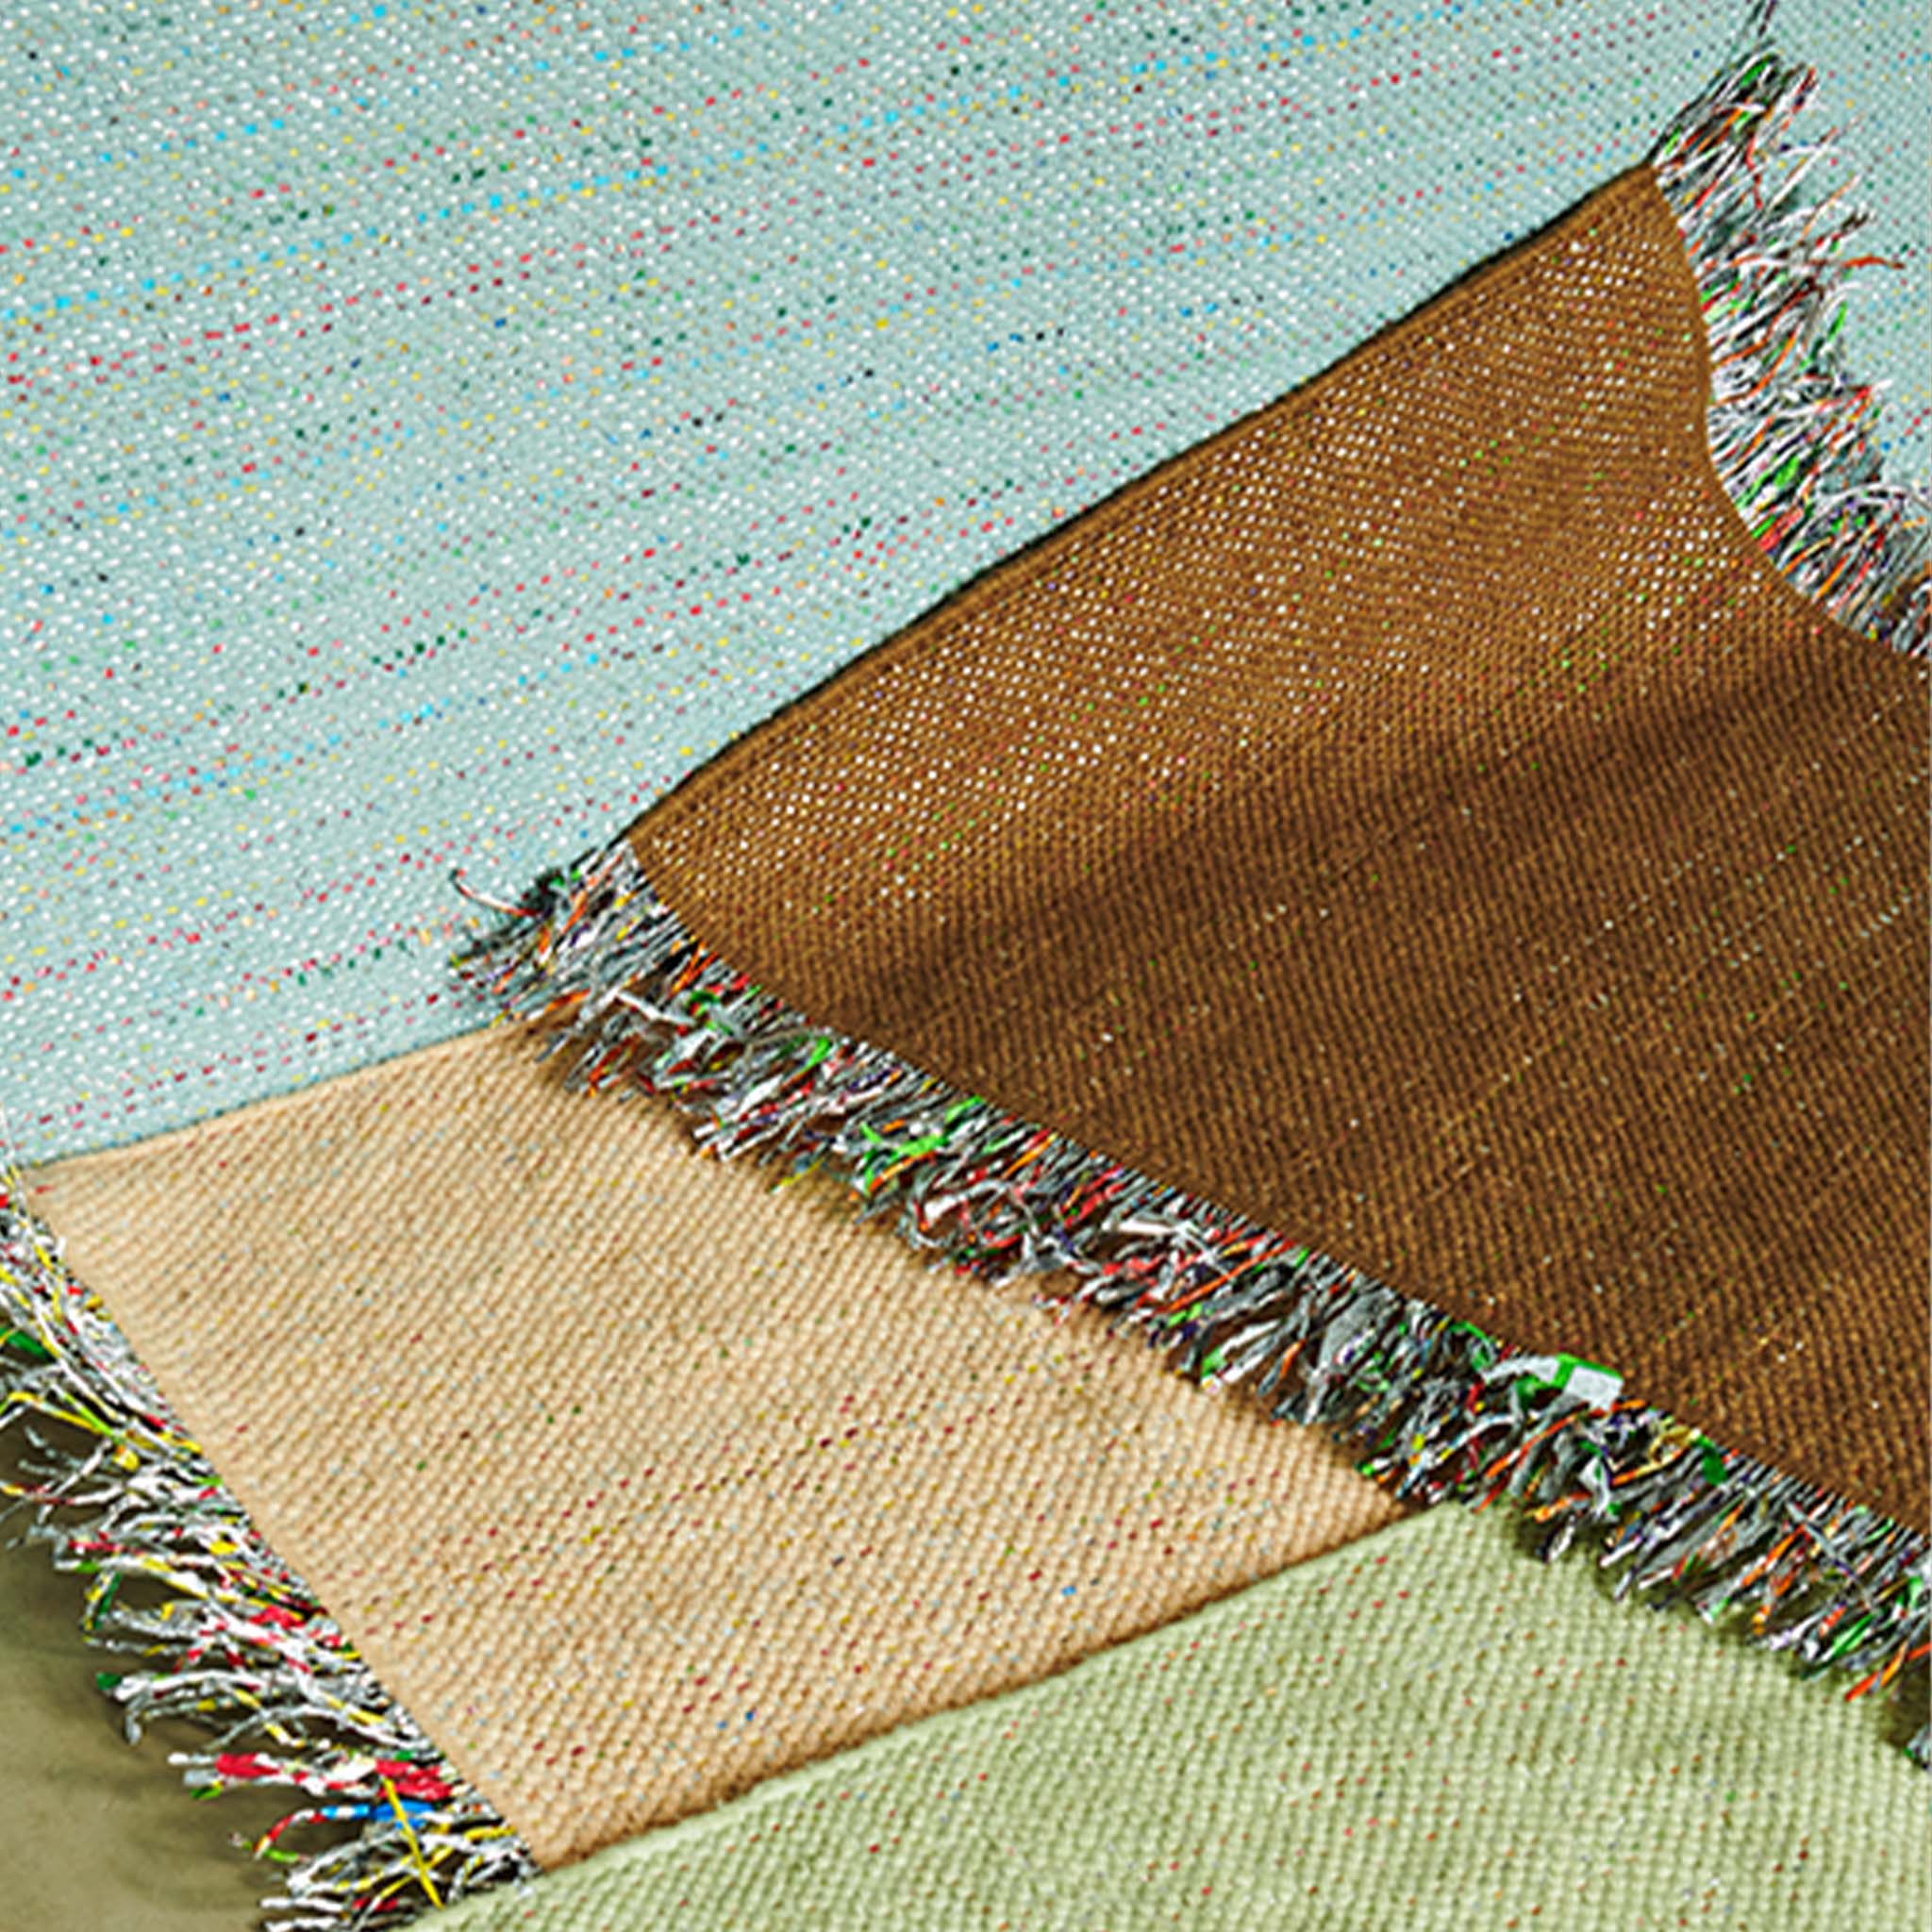 Candy Wrapper Rug_Classic_leather and lace